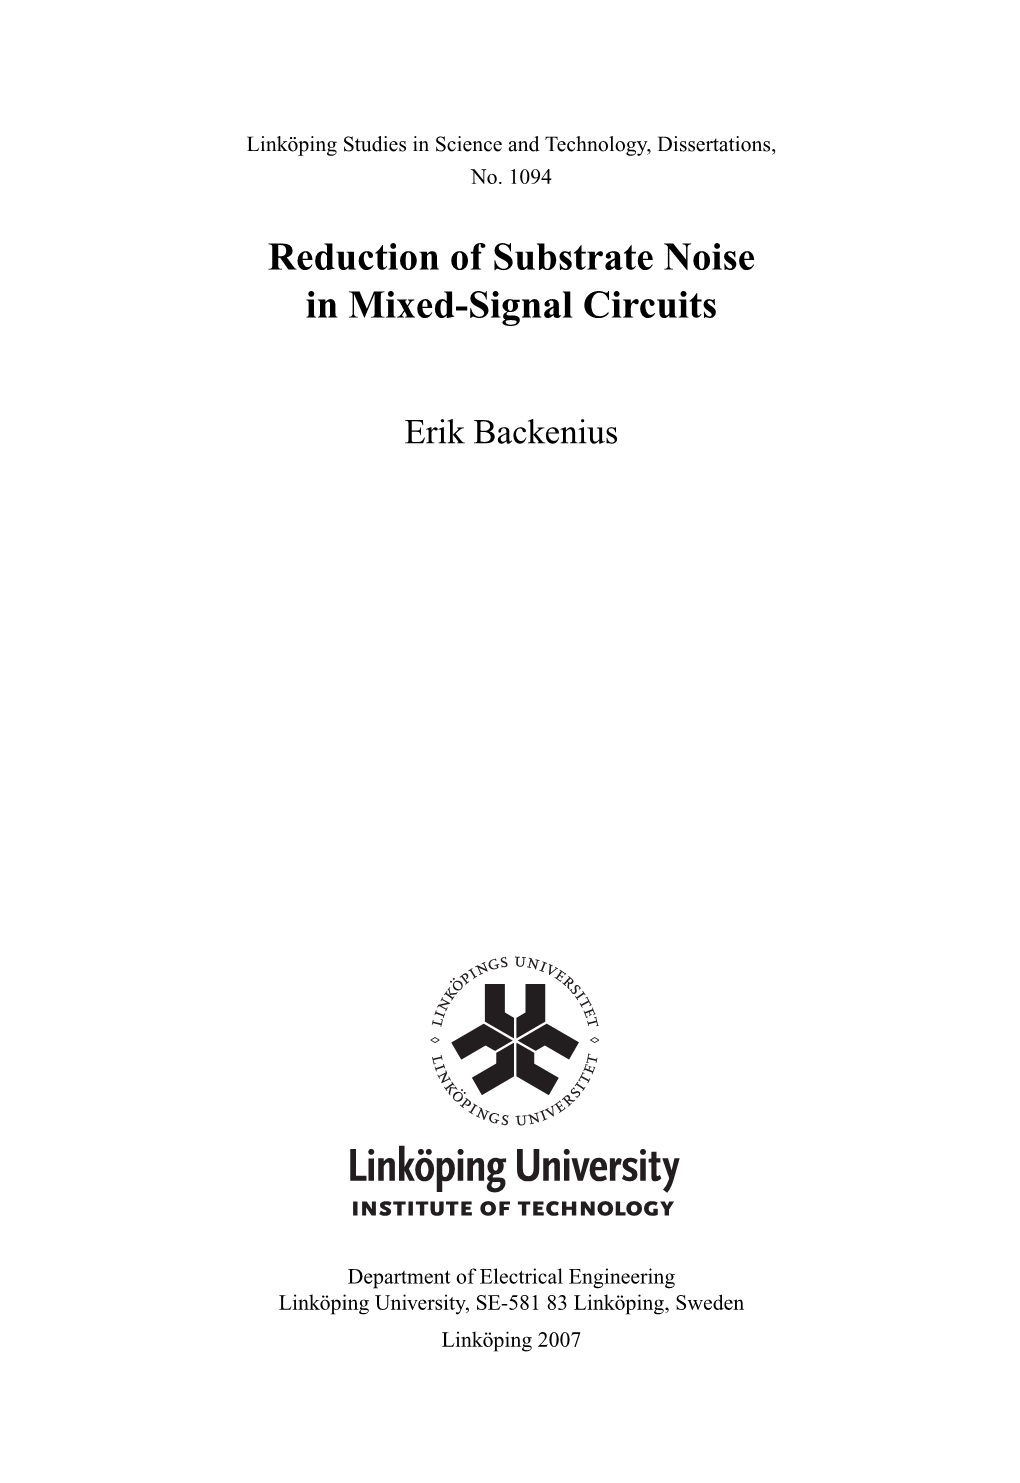 Reduction of Substrate Noise in Mixed-Signal Circuits